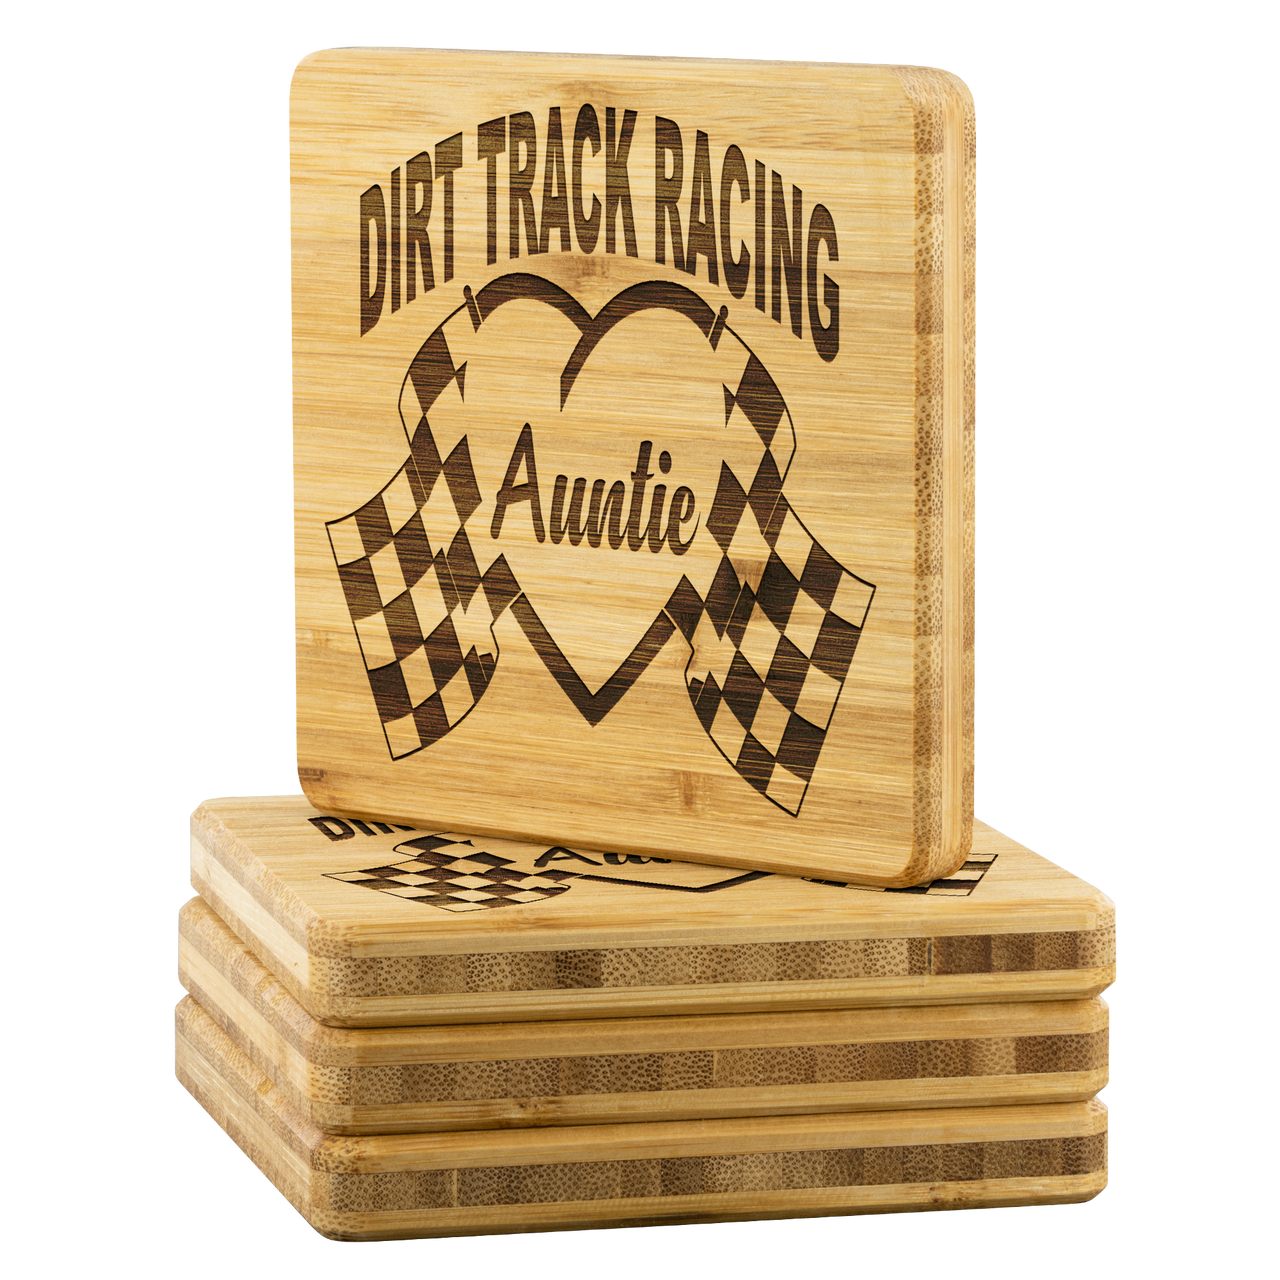 Dirt Track Racing Auntie Bamboo Coaster